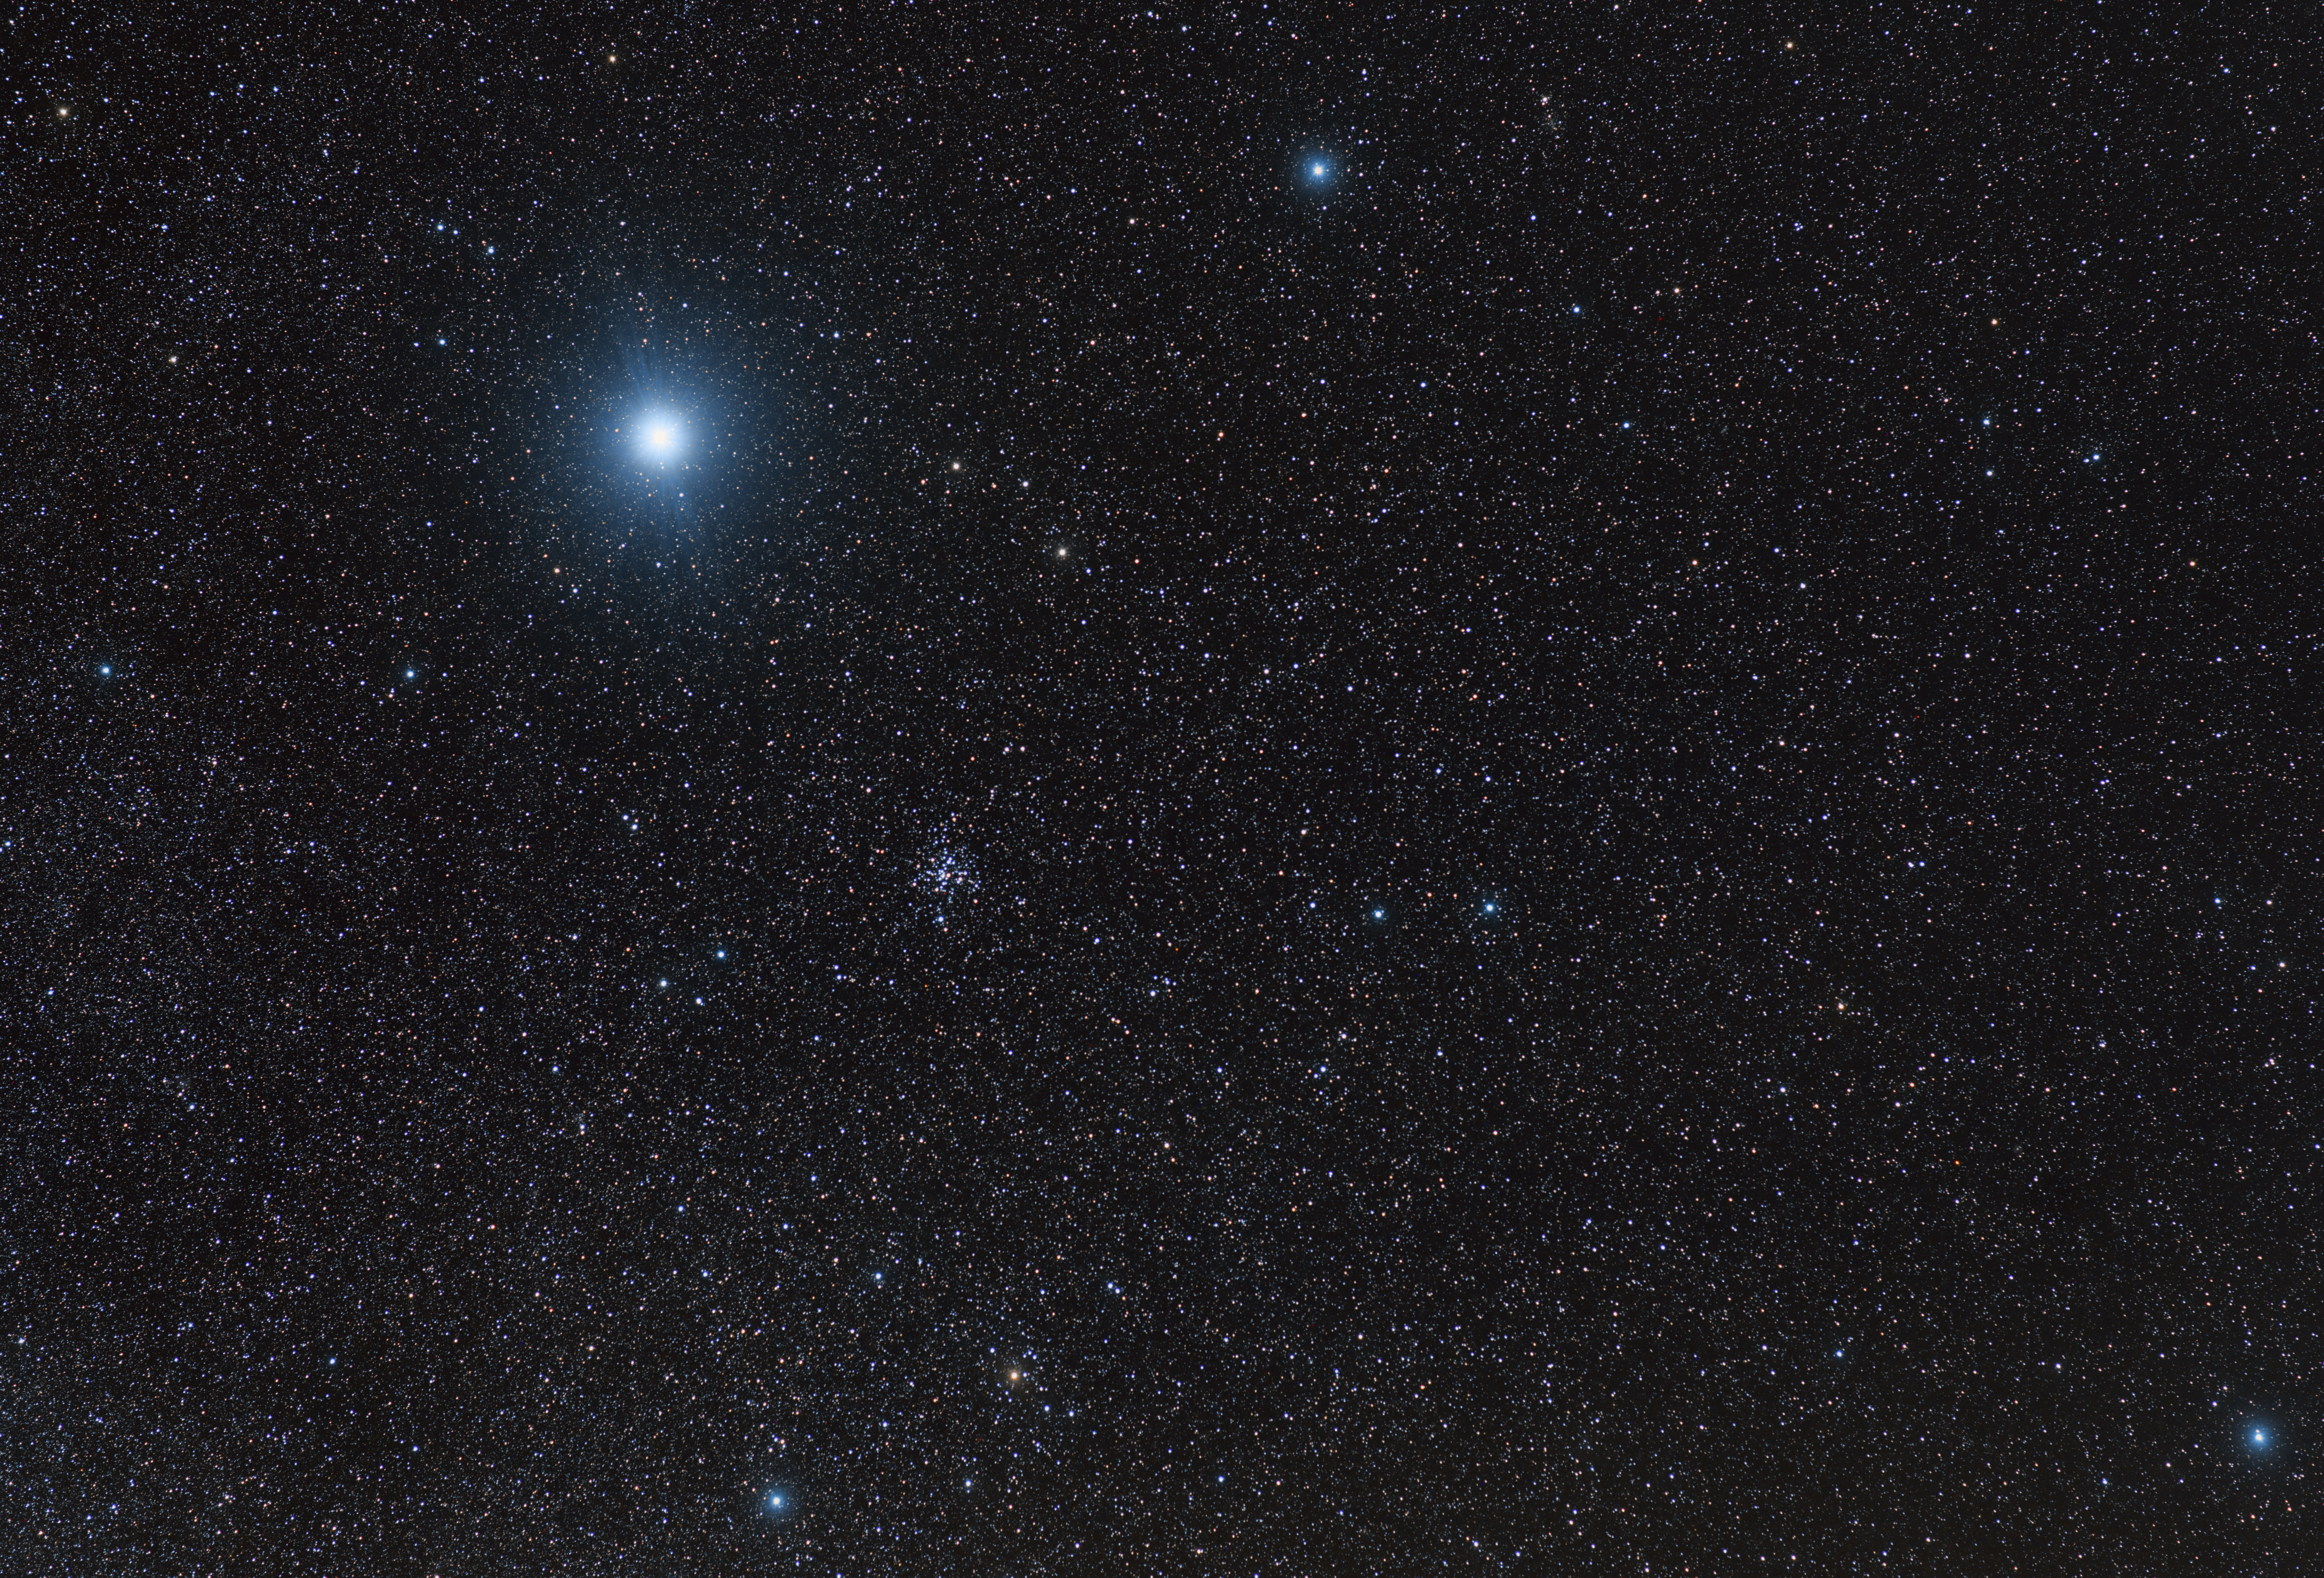 Sirius, the brightest star in the night sky. — The Astro Geeks